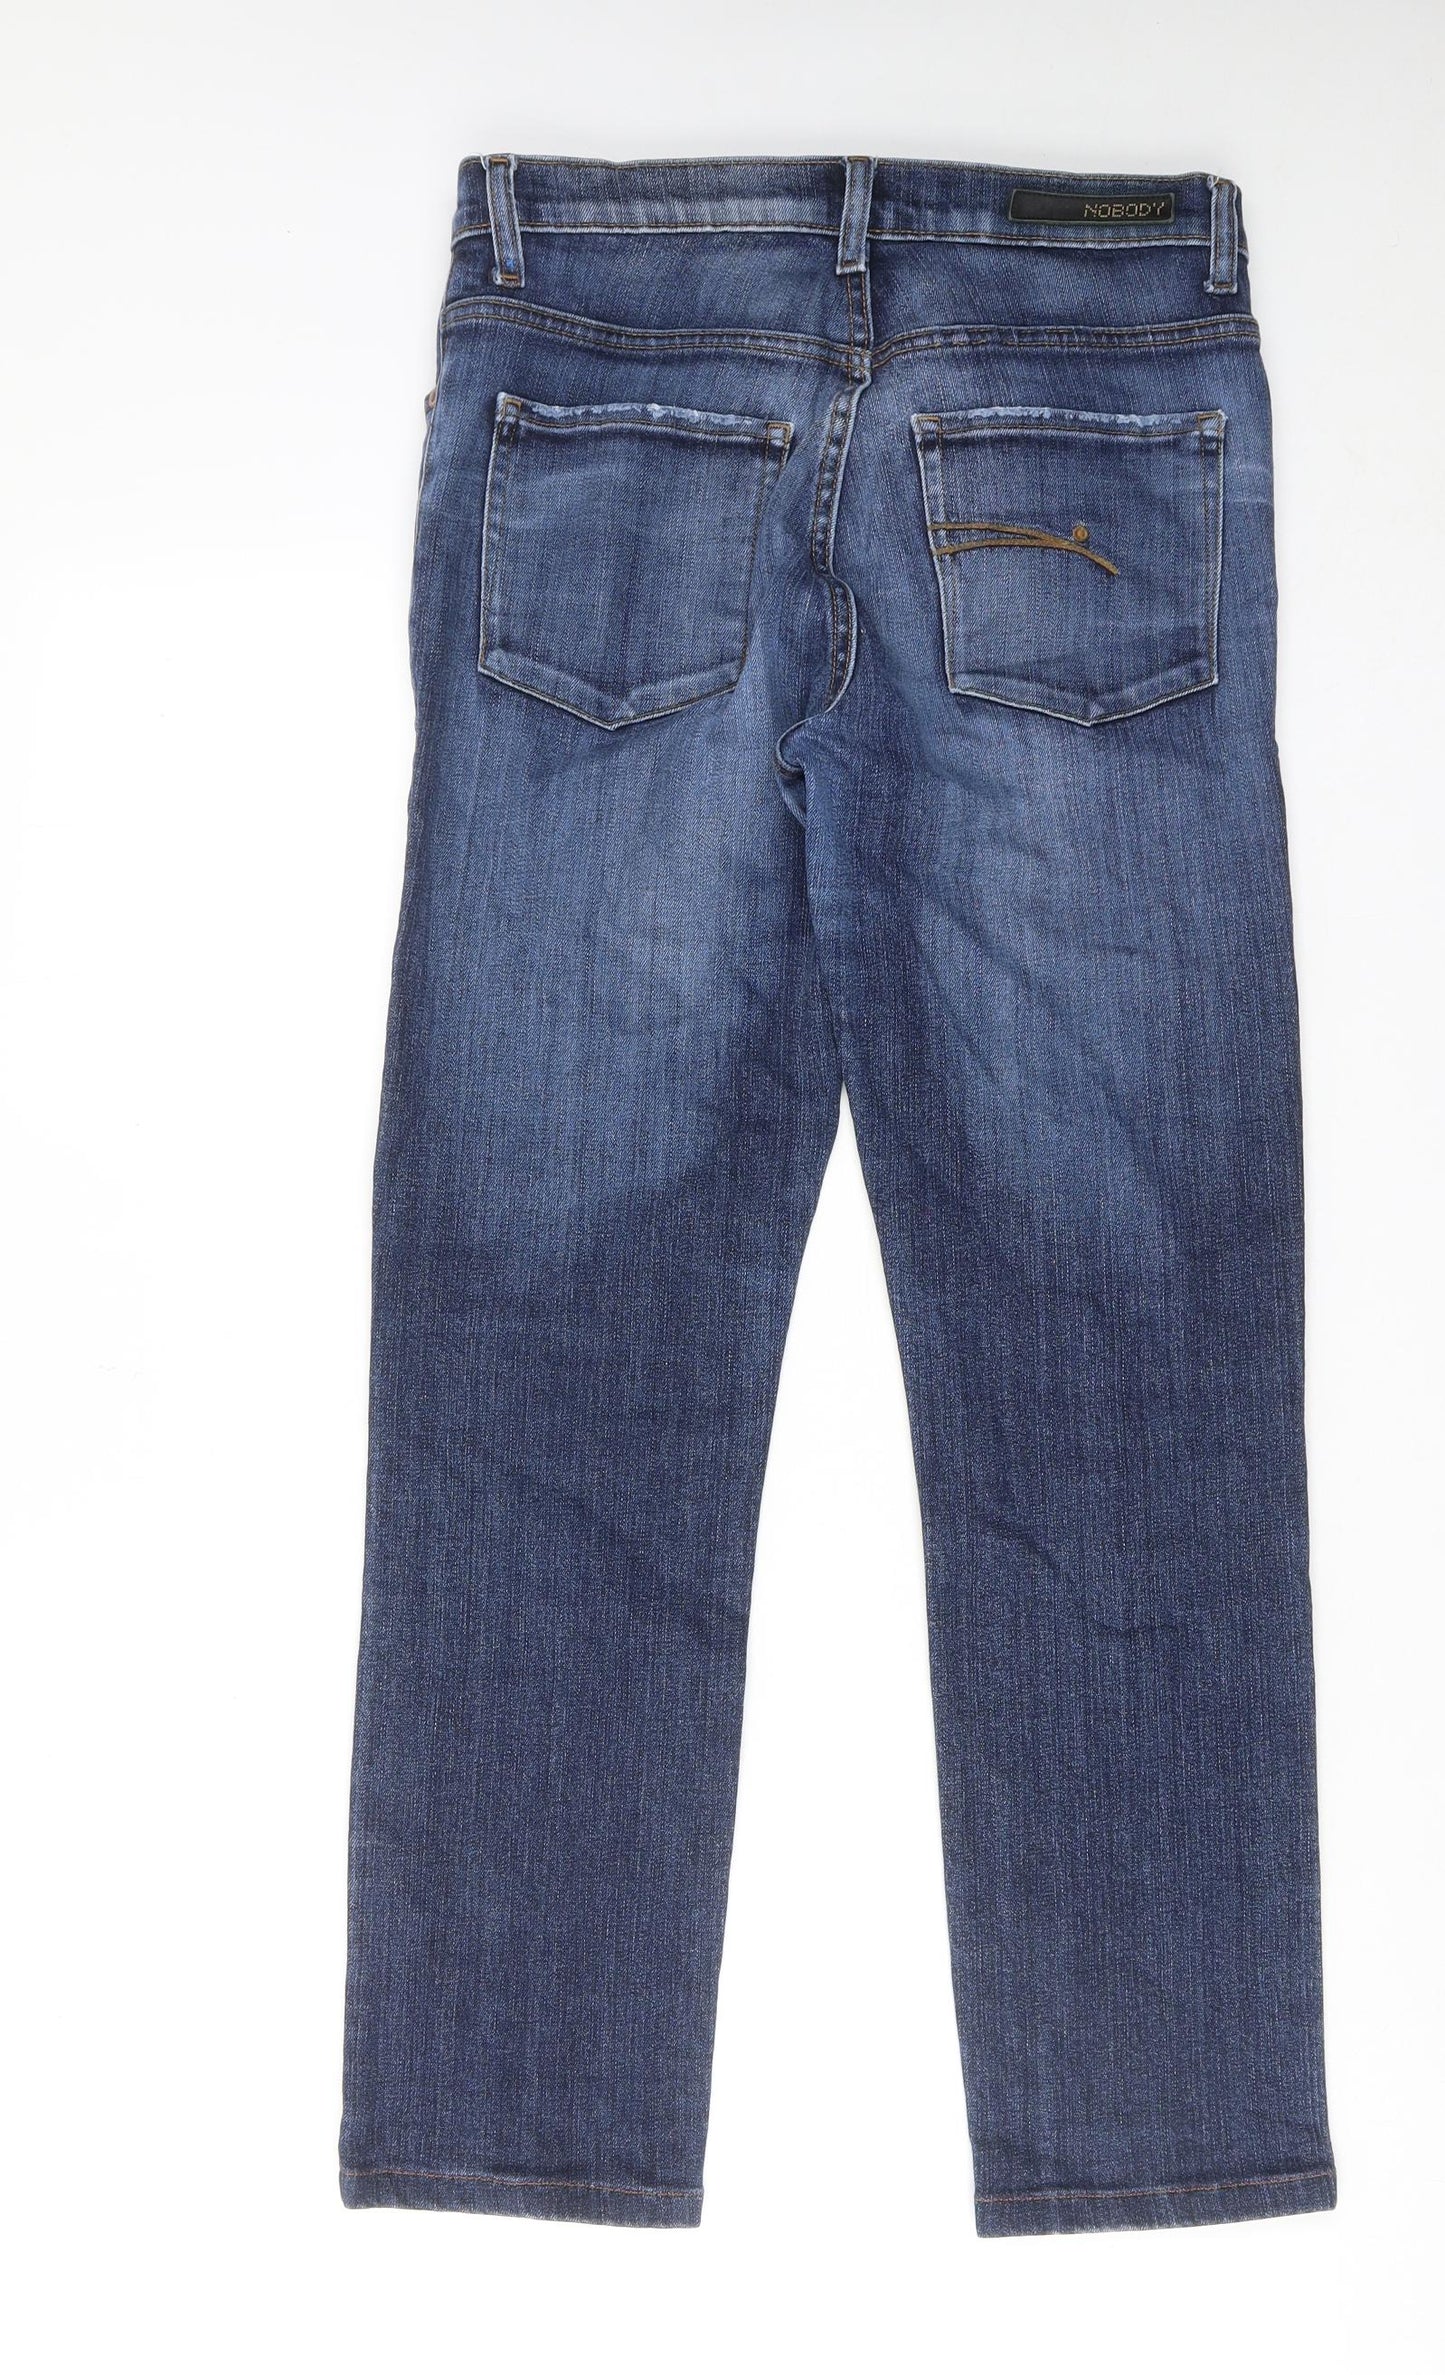 Nobody Womens Blue Cotton Straight Jeans Size 30 in Regular Zip